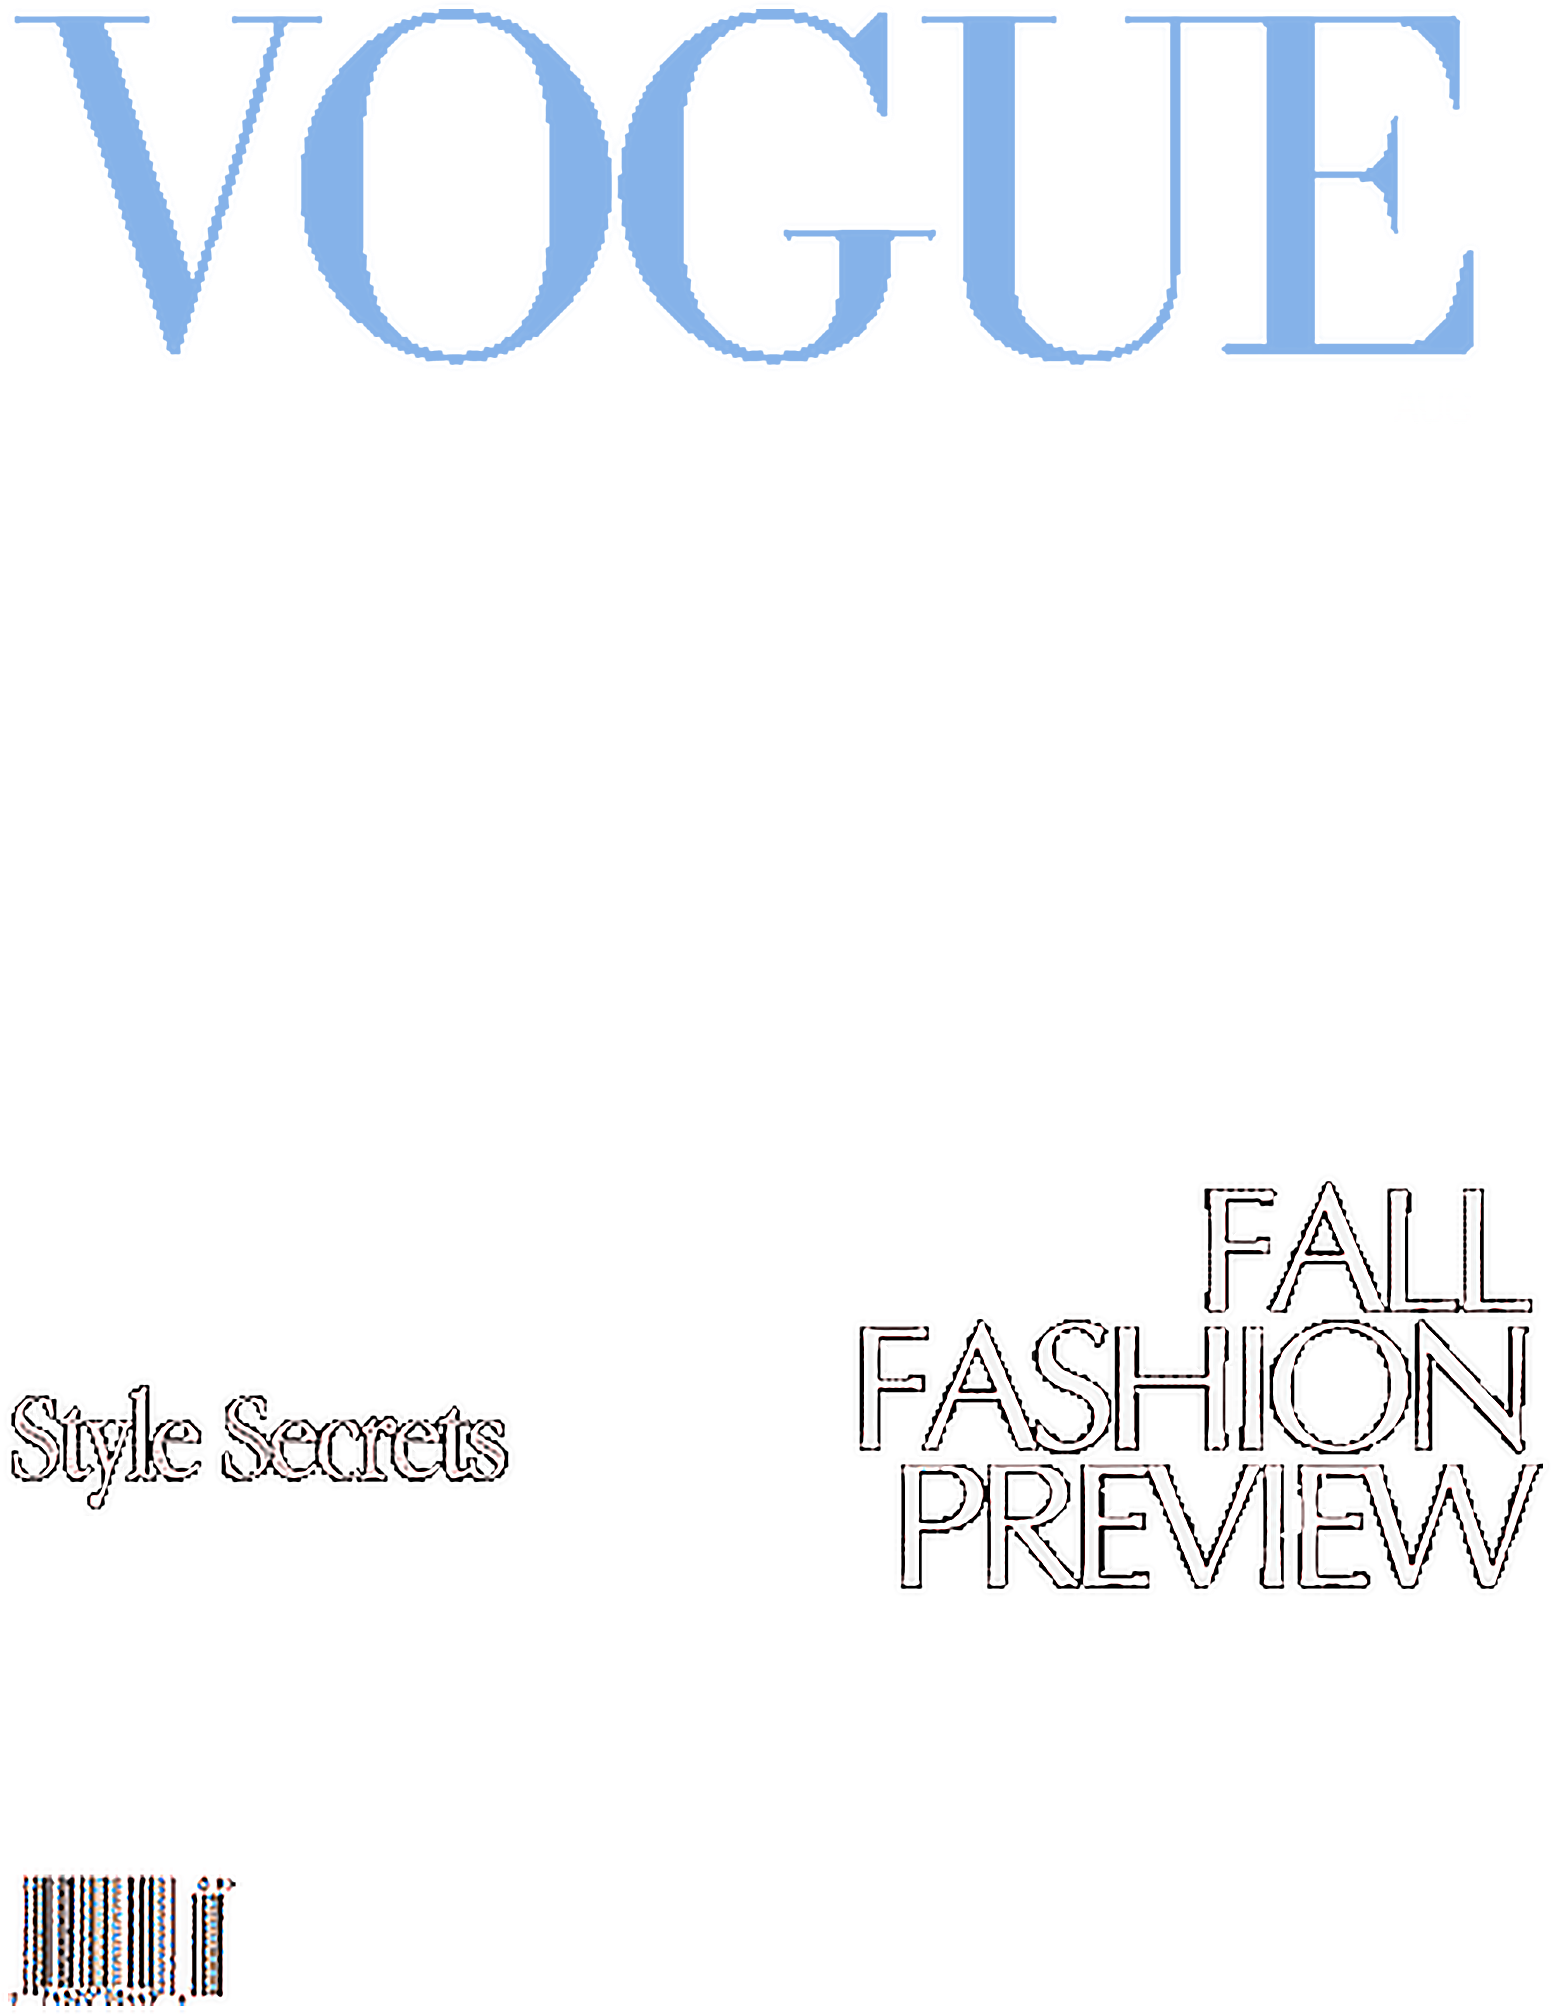 Create A Magazine Cover With An Image Of Your Own Vogue